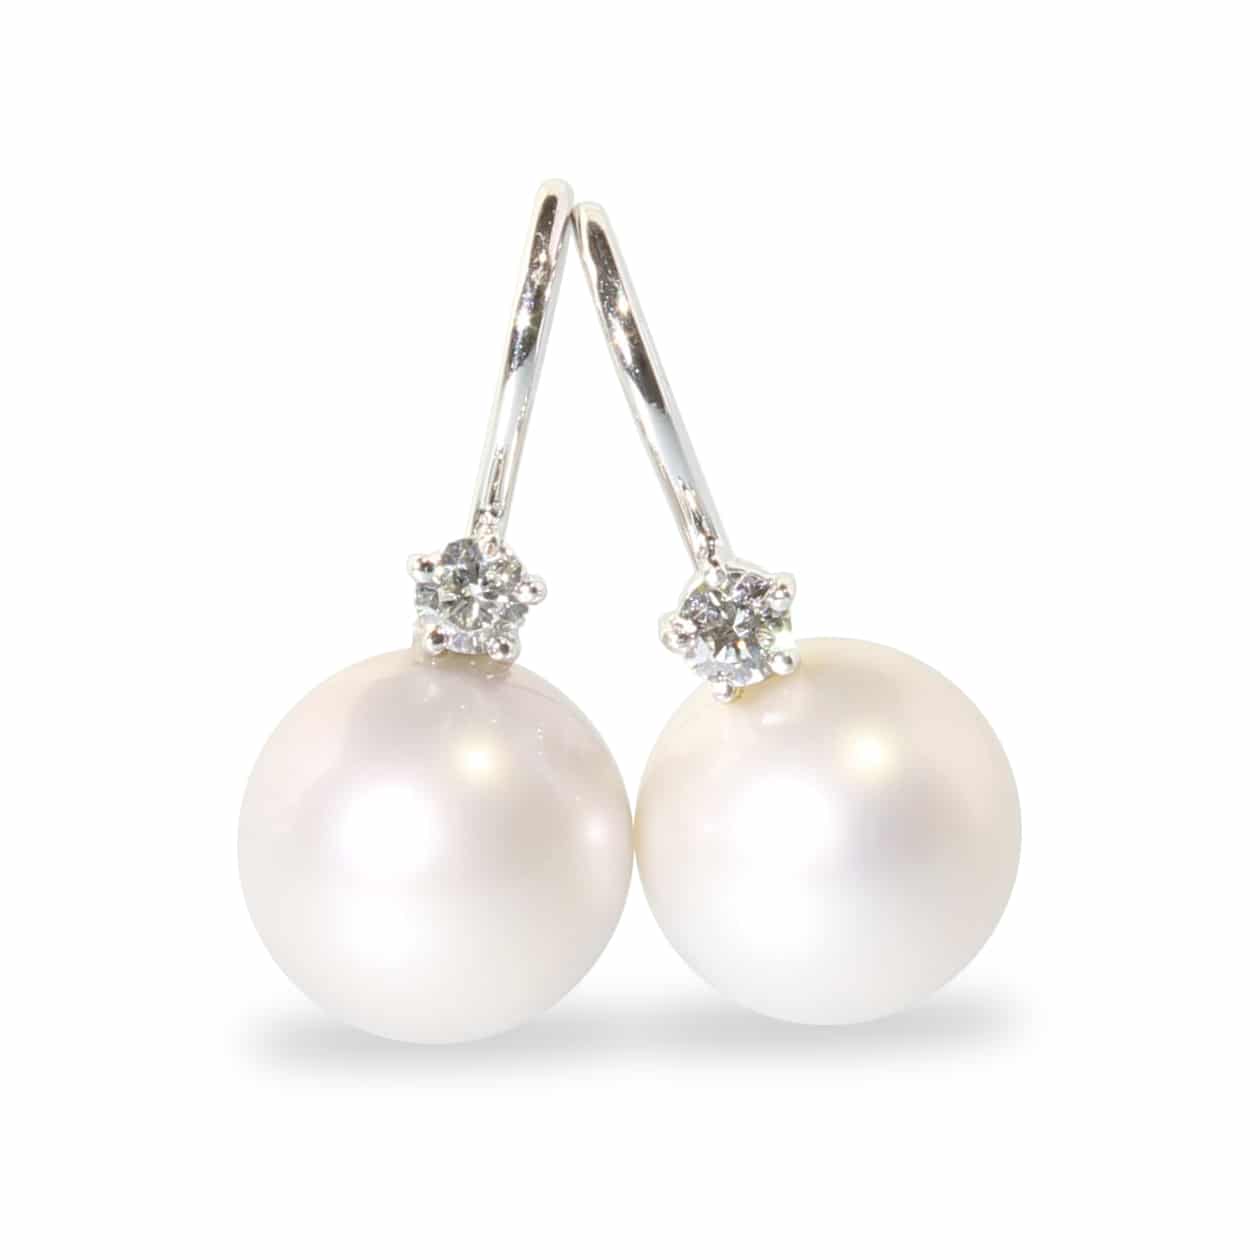 Earrings with pearls and diamonds in 18K white gold; handmade.  Exclusive piece.